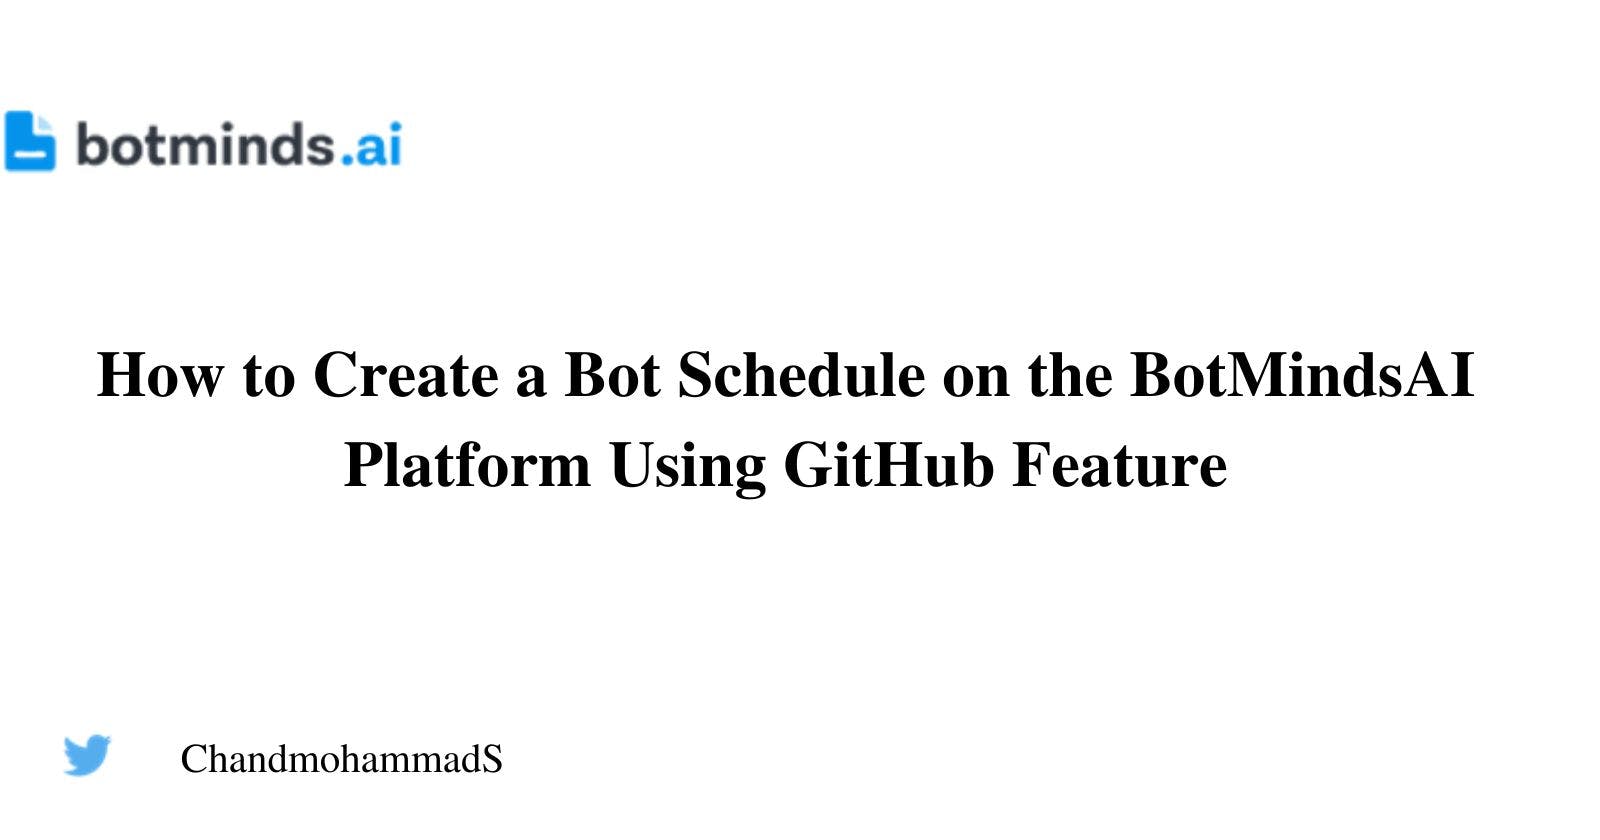 How to Create a Bot Schedule on the BotMindsAI Platform Using GitHub Feature